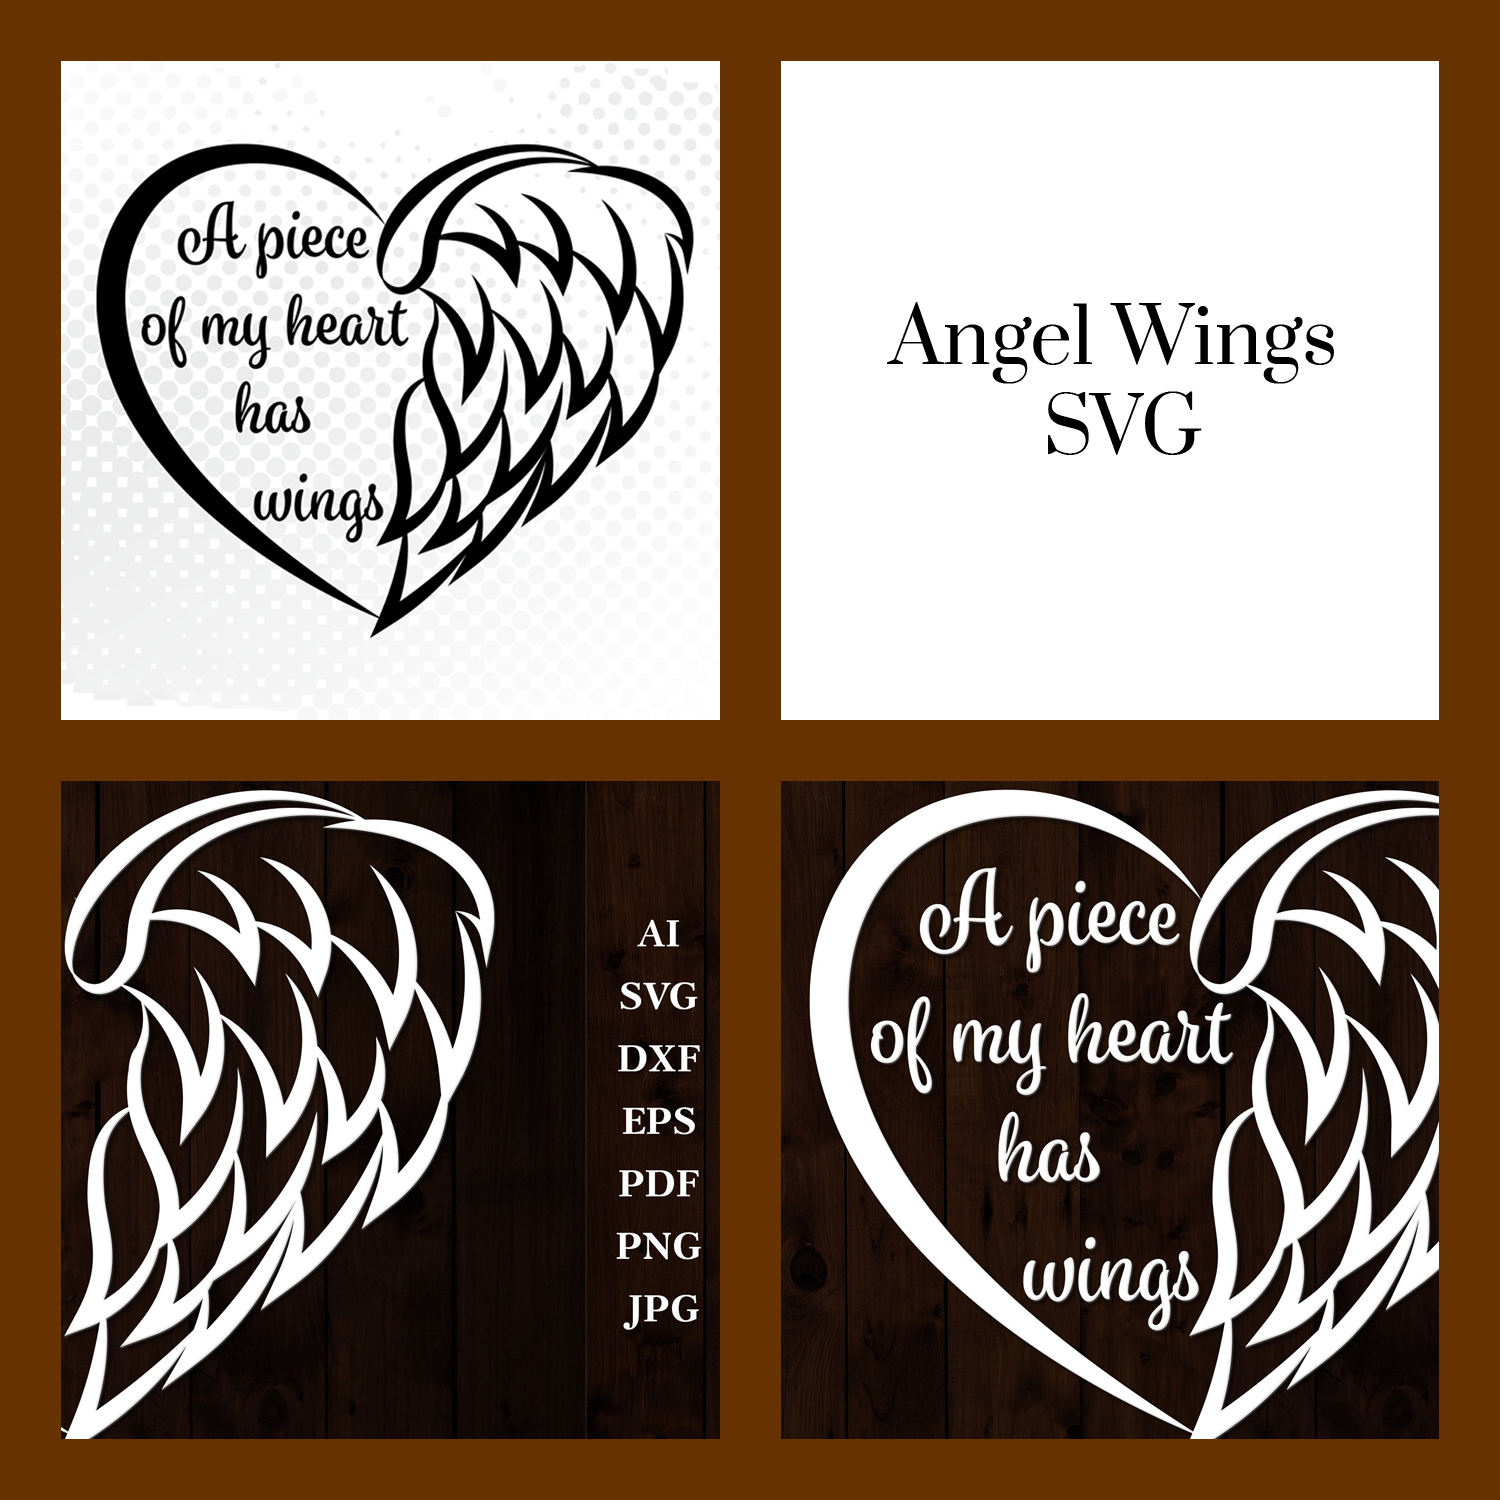 Angel wings svg preview.